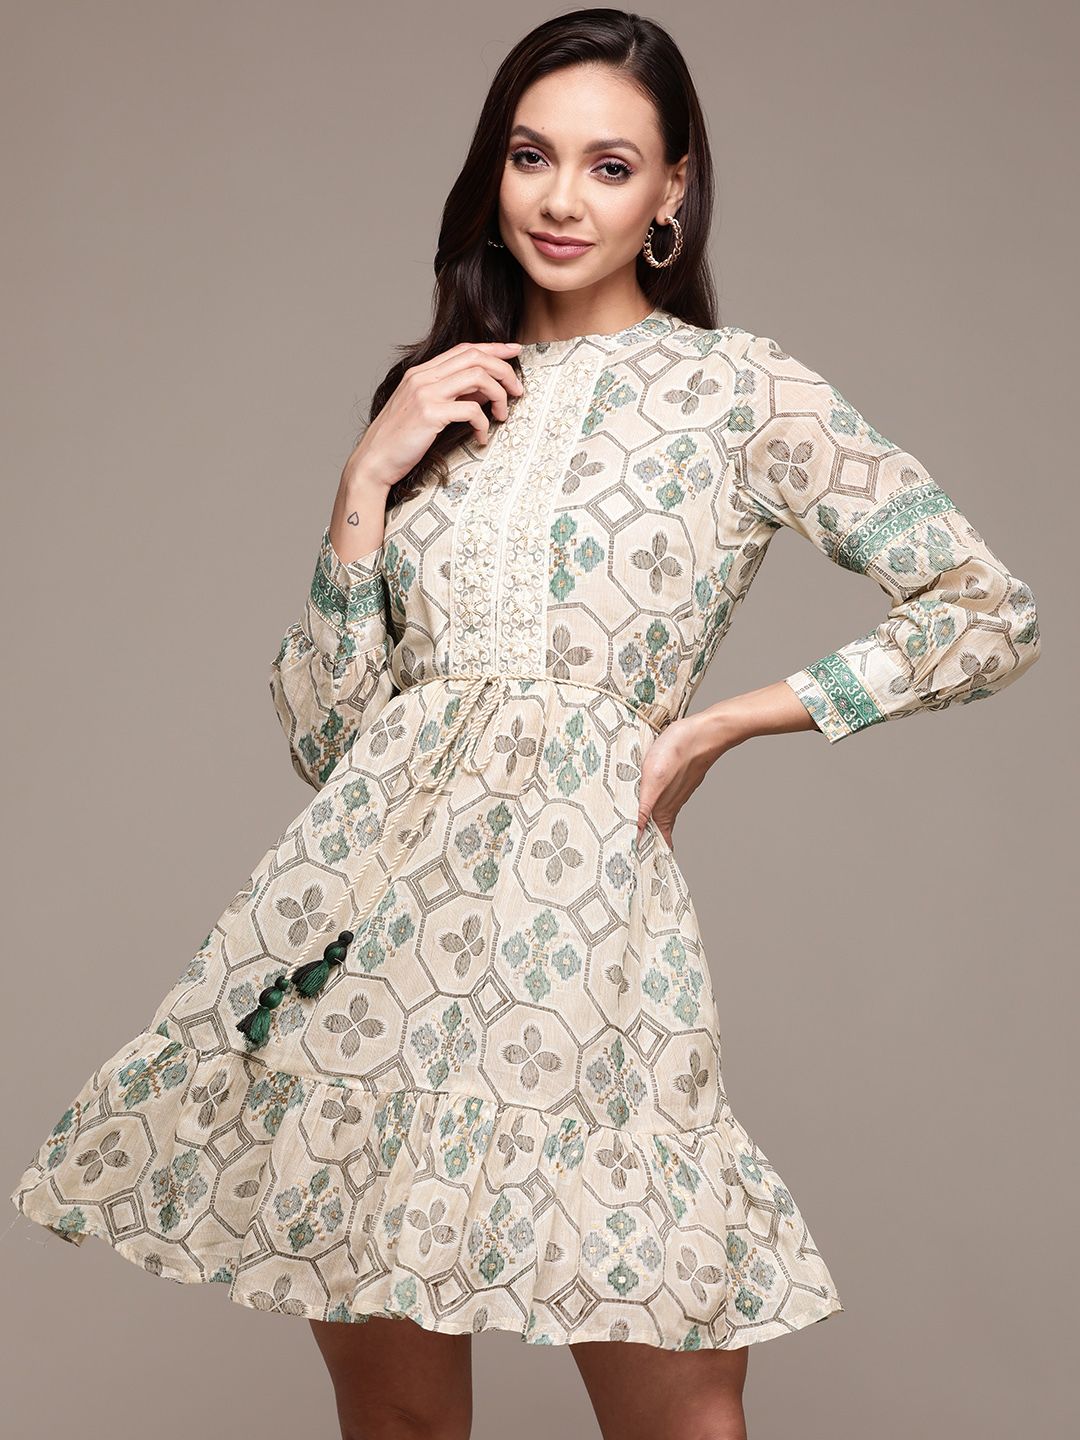 Ishin Beige & Green Ethnic Motifs Embroidered Embellished Lace Inserts Cotton A-Line Dress Price in India